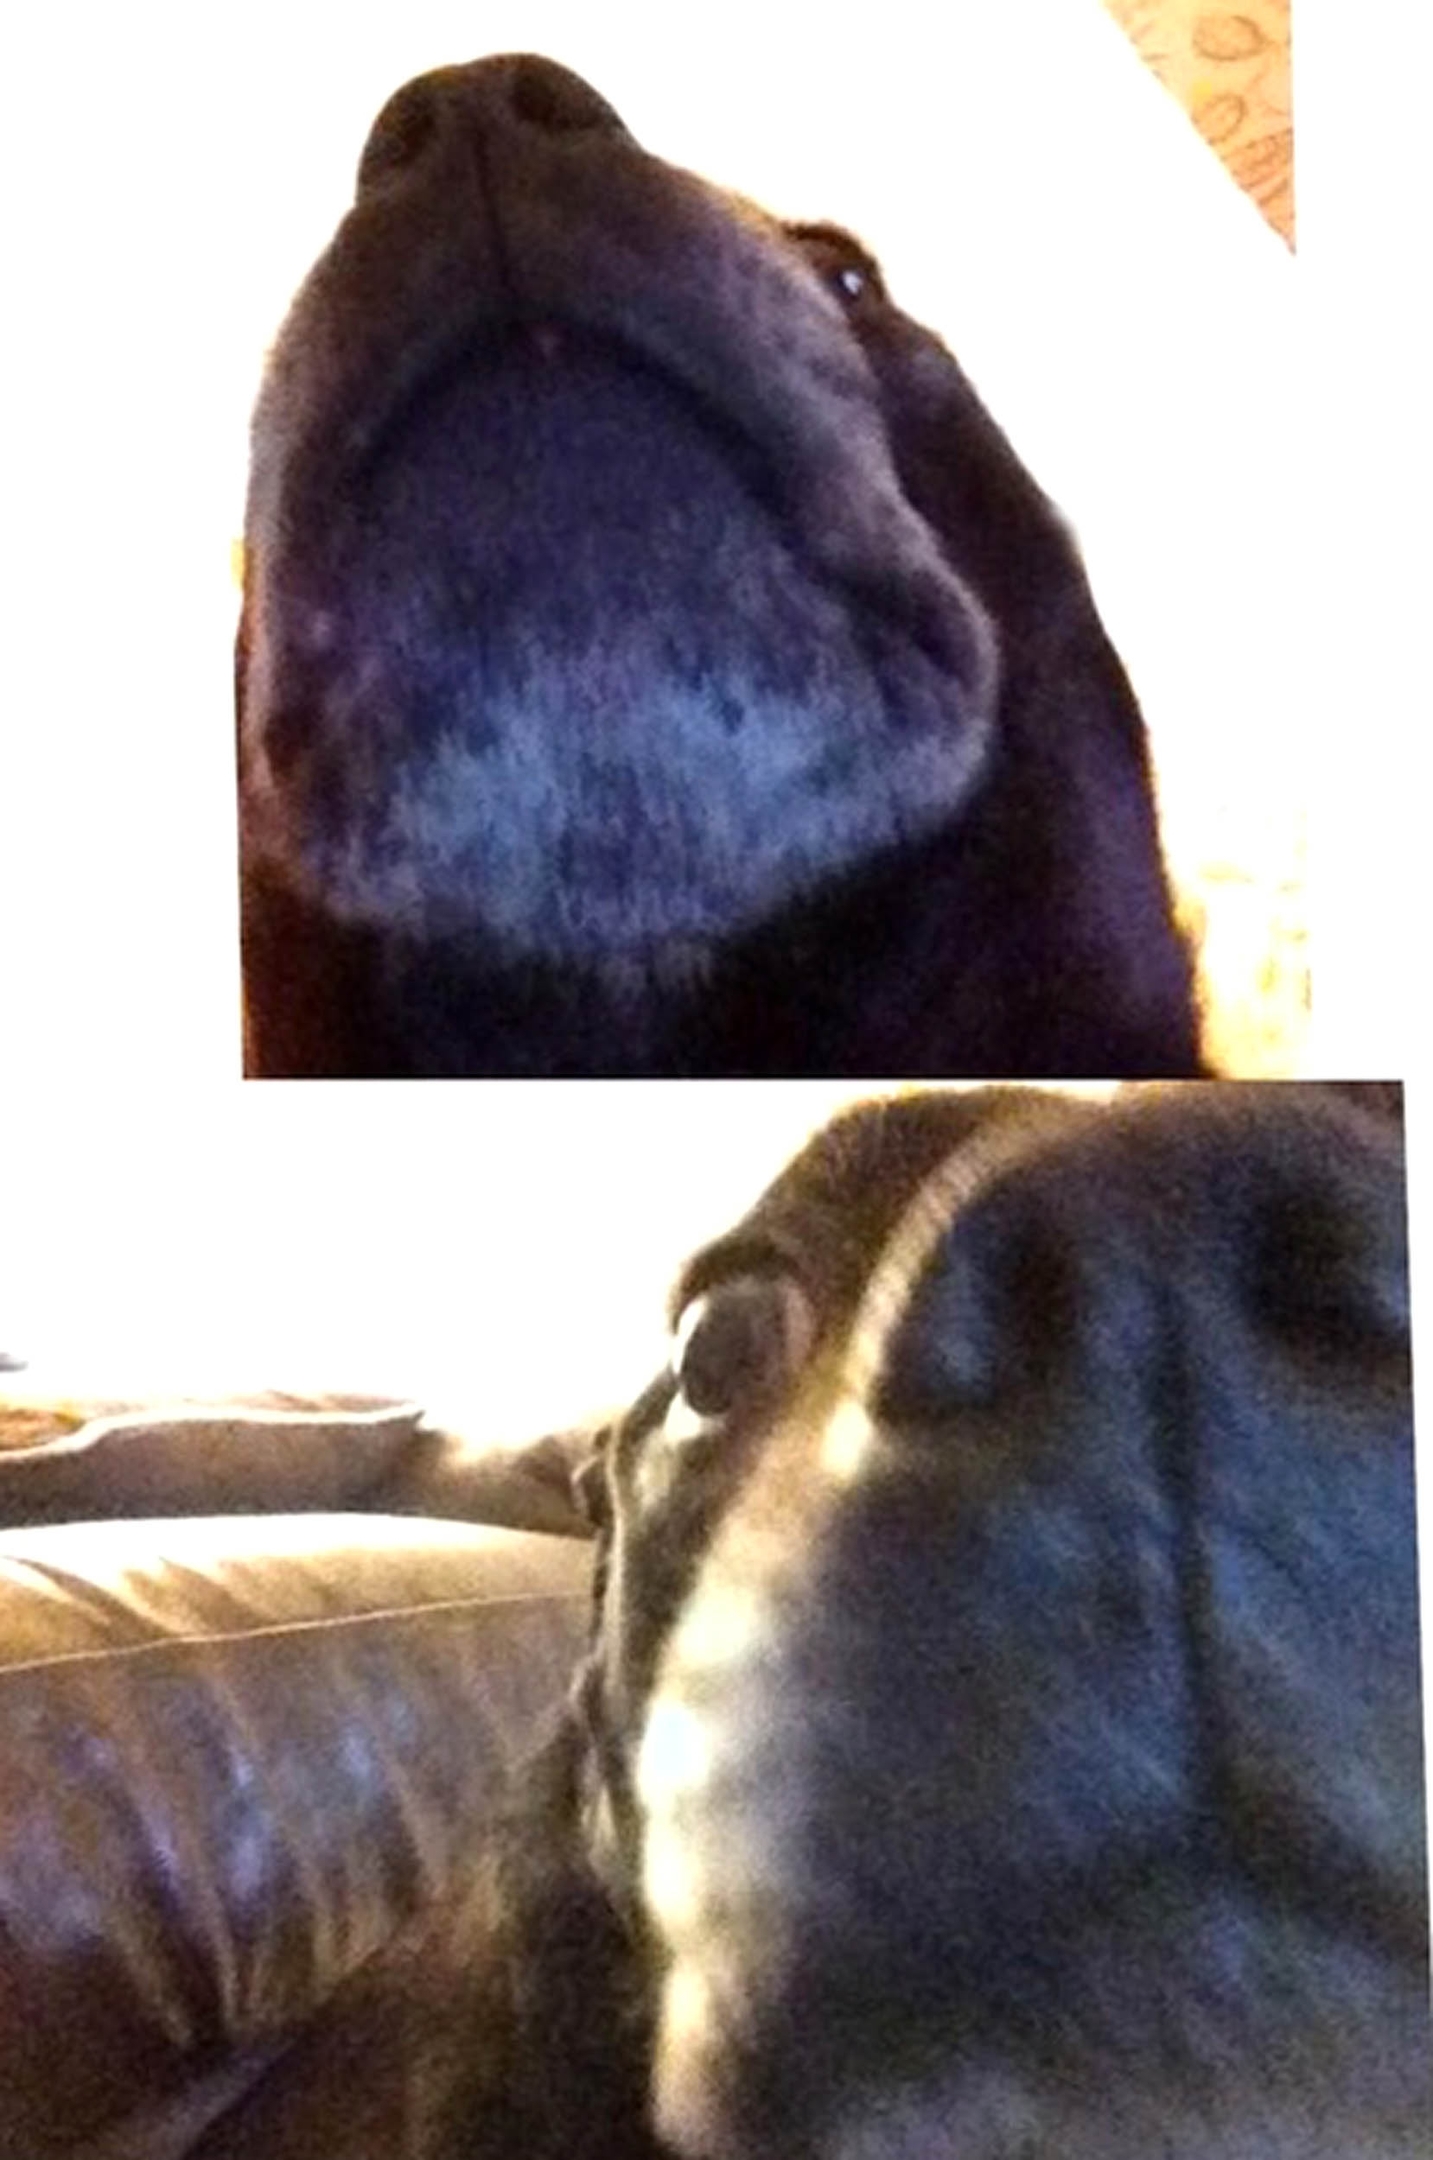 "My dog stood on my phone and took selfies" PETS across the globe are getting in on the selfie phenomenon. Curious cats, dopey dogs and even ham-fisted hamsters are snapping themselves on their owners mobiles - with hilarious results. The pictures, which include a close-up of a one-eyed cat, all were produced when clumsy pets stood on their owners phones or iPads. The results are varied - some pictures show cats looking down into the camera with their chin appearing extremely enlarged, and in others a dogs nose takes up most of the photo.